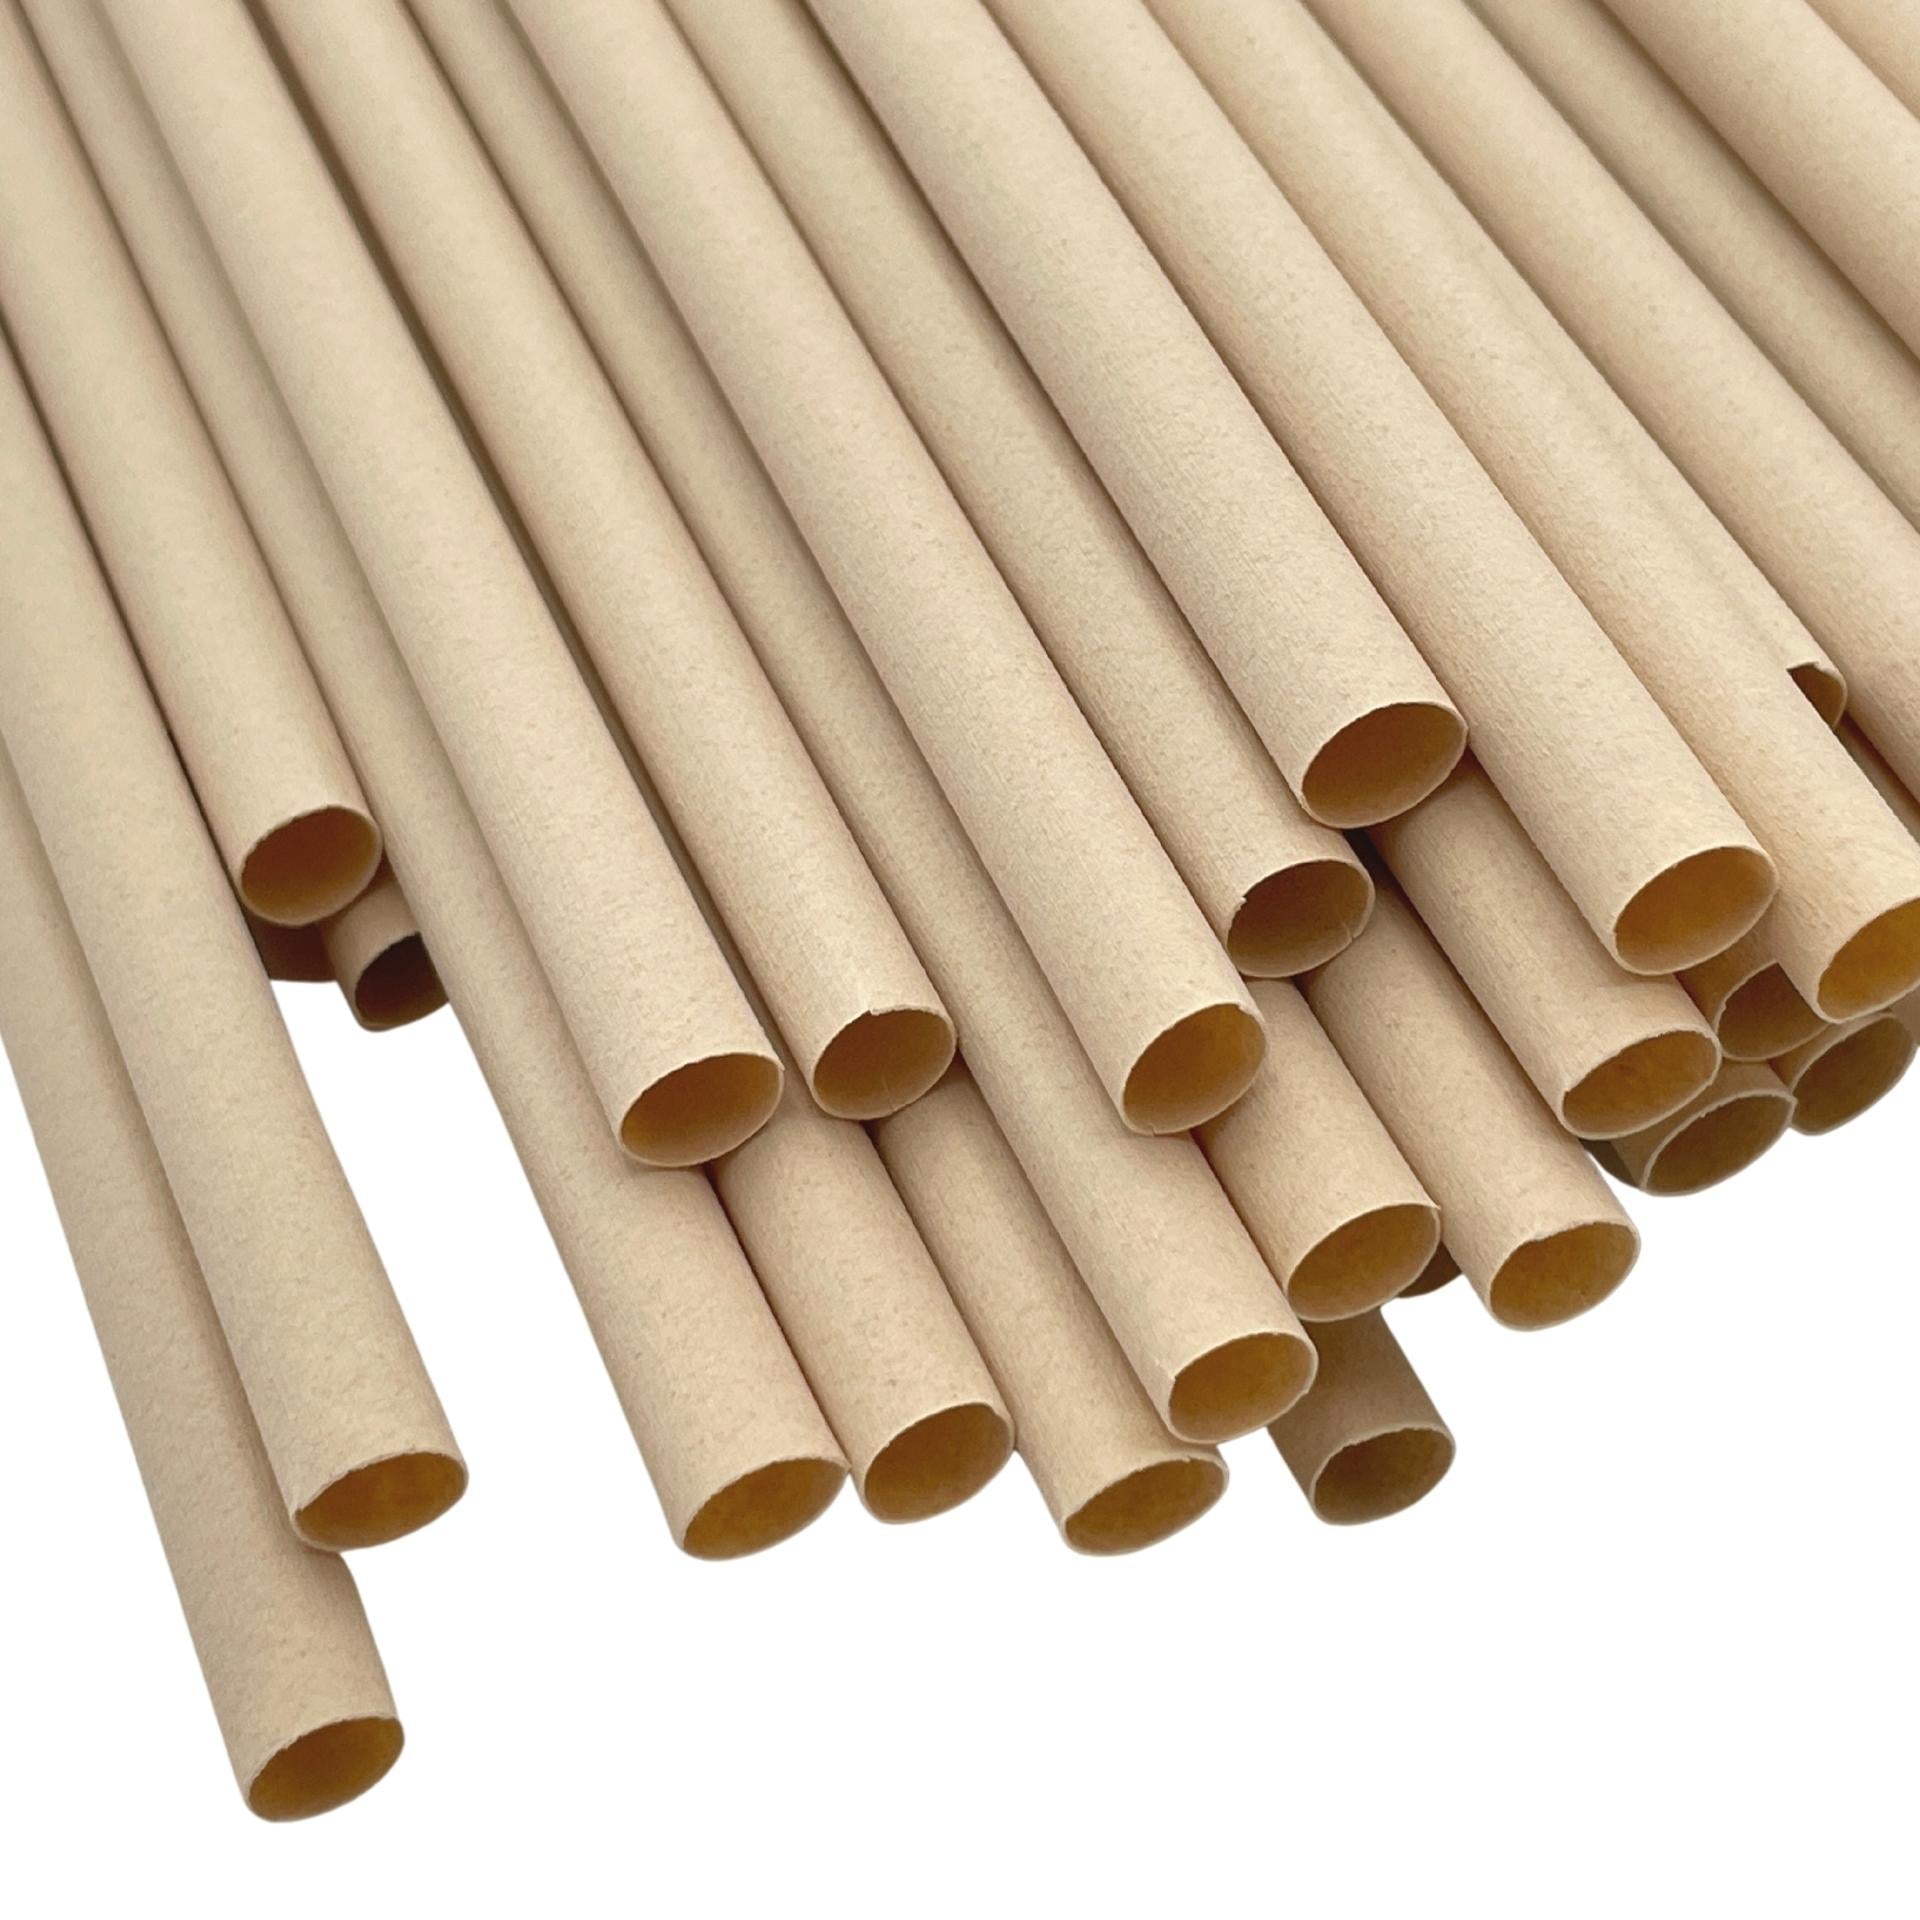 CHANYI Bamboo Straws 6mm - 100% Compostable Plant-Based Bamboo Fiber, Durable, Eco Friendly, Biodegradable & Disposable, for Drinking